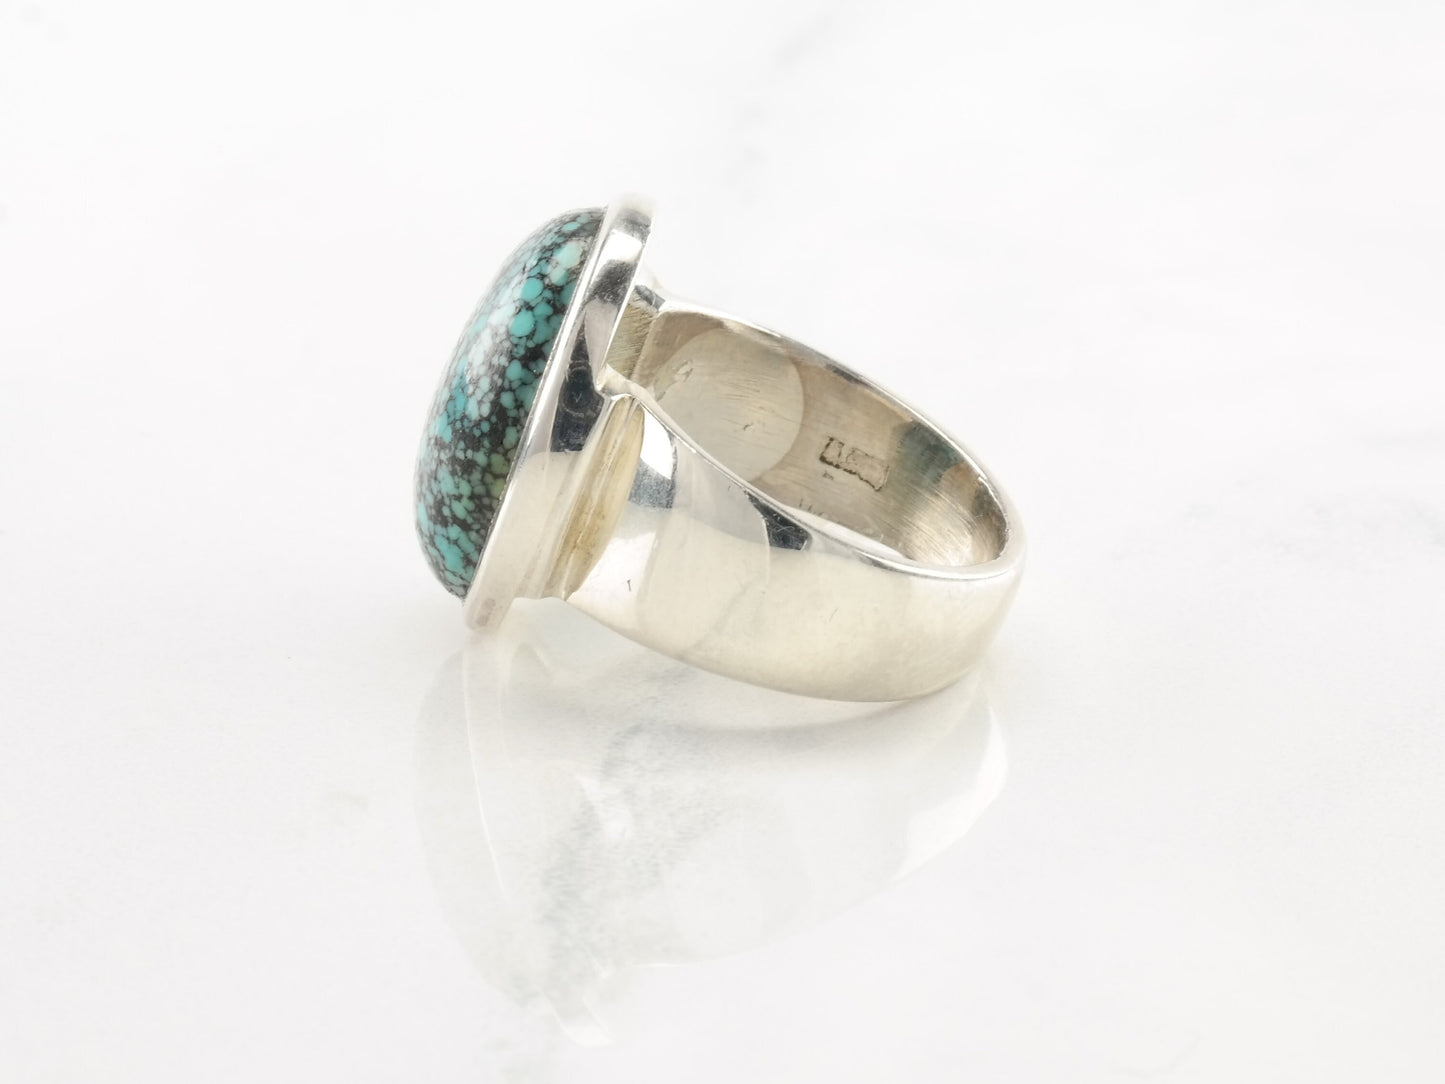 Vintage Southwest Ring Turquoise Sterling Silver Size 7